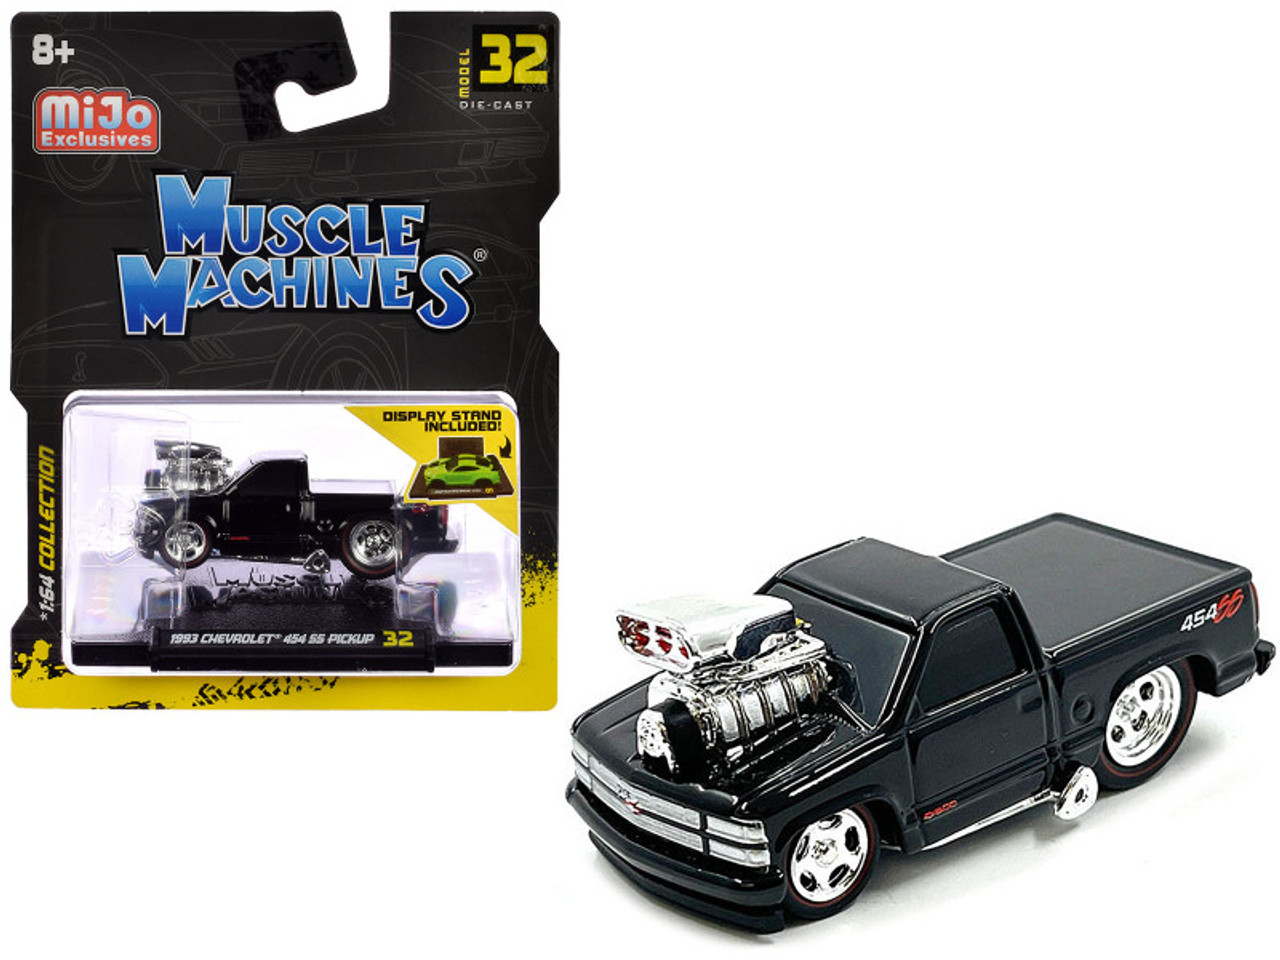 1993 Chevrolet 454 SS Pickup Truck Black 1/64 Diecast Model Car by Muscle Machines